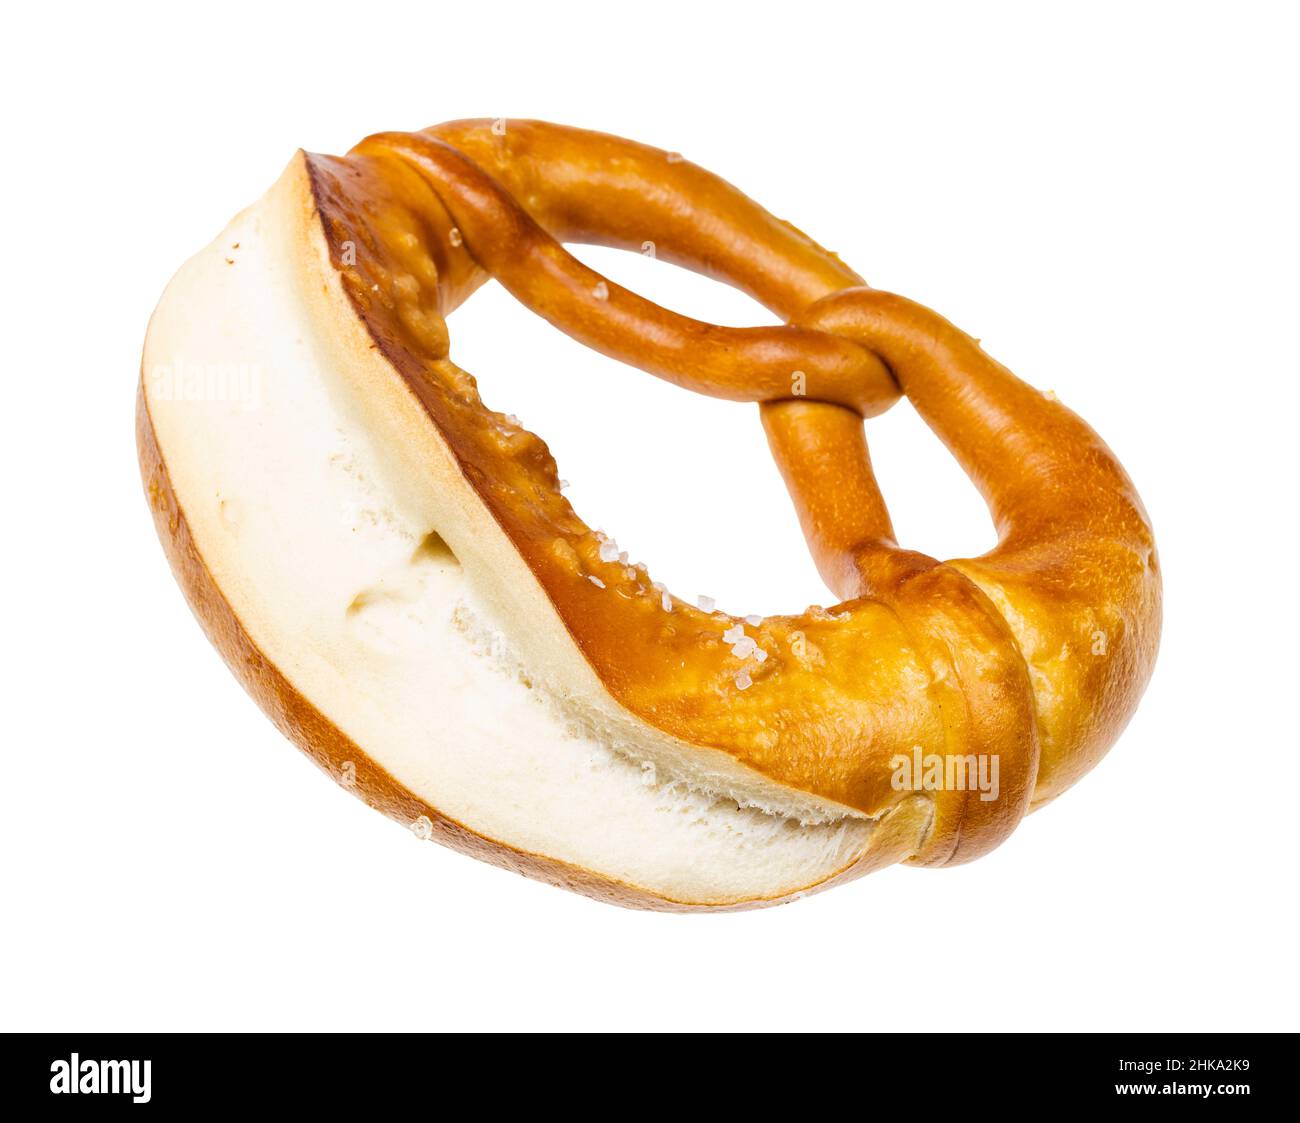 front view of laugenbrezel with salt isolated on white background Stock Photo